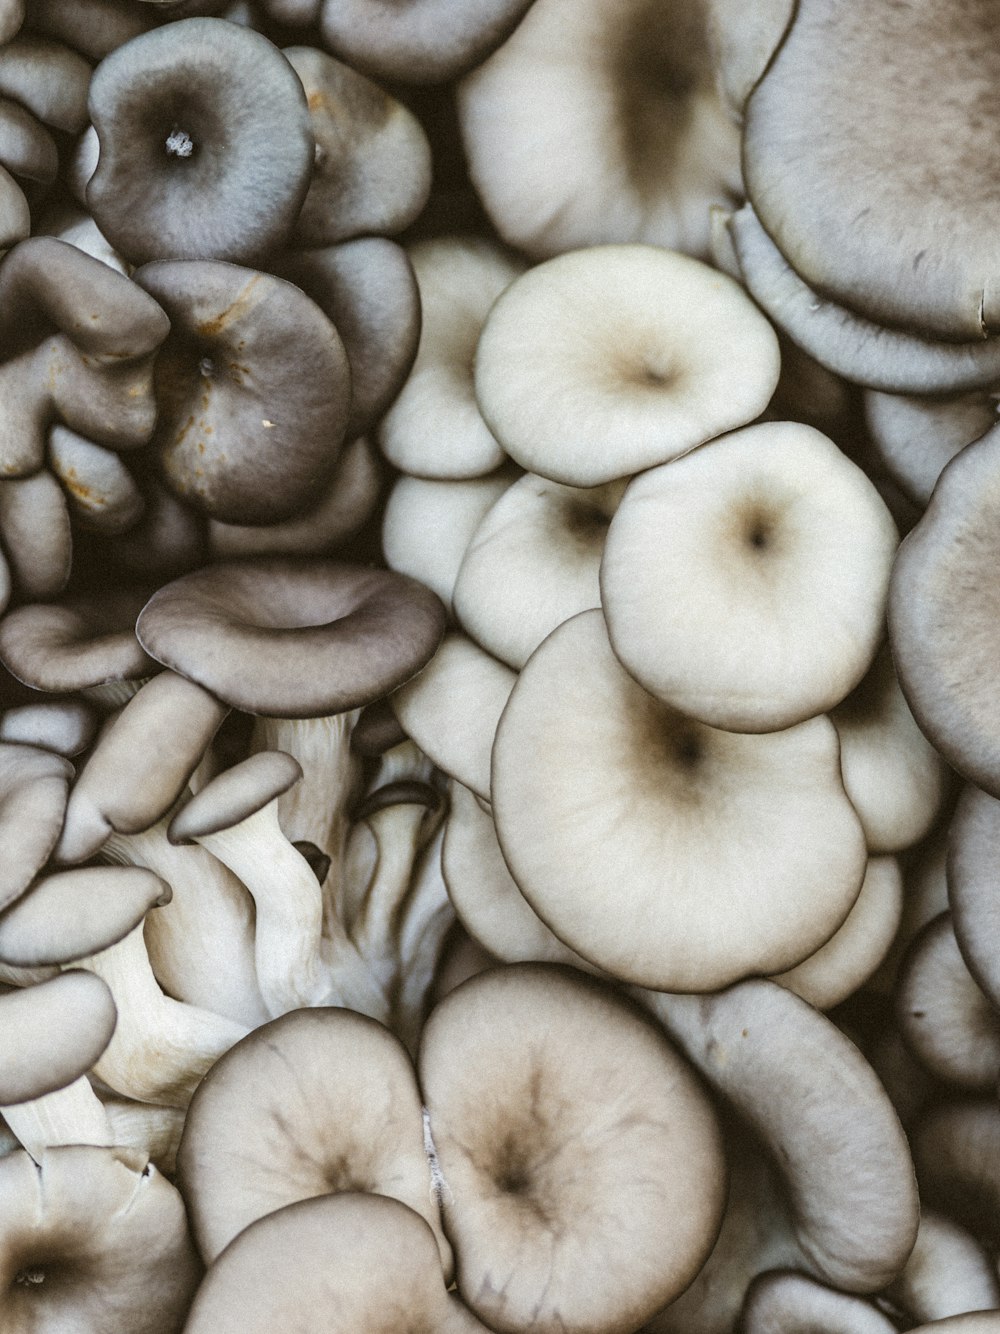 brown mushrooms in close up photography